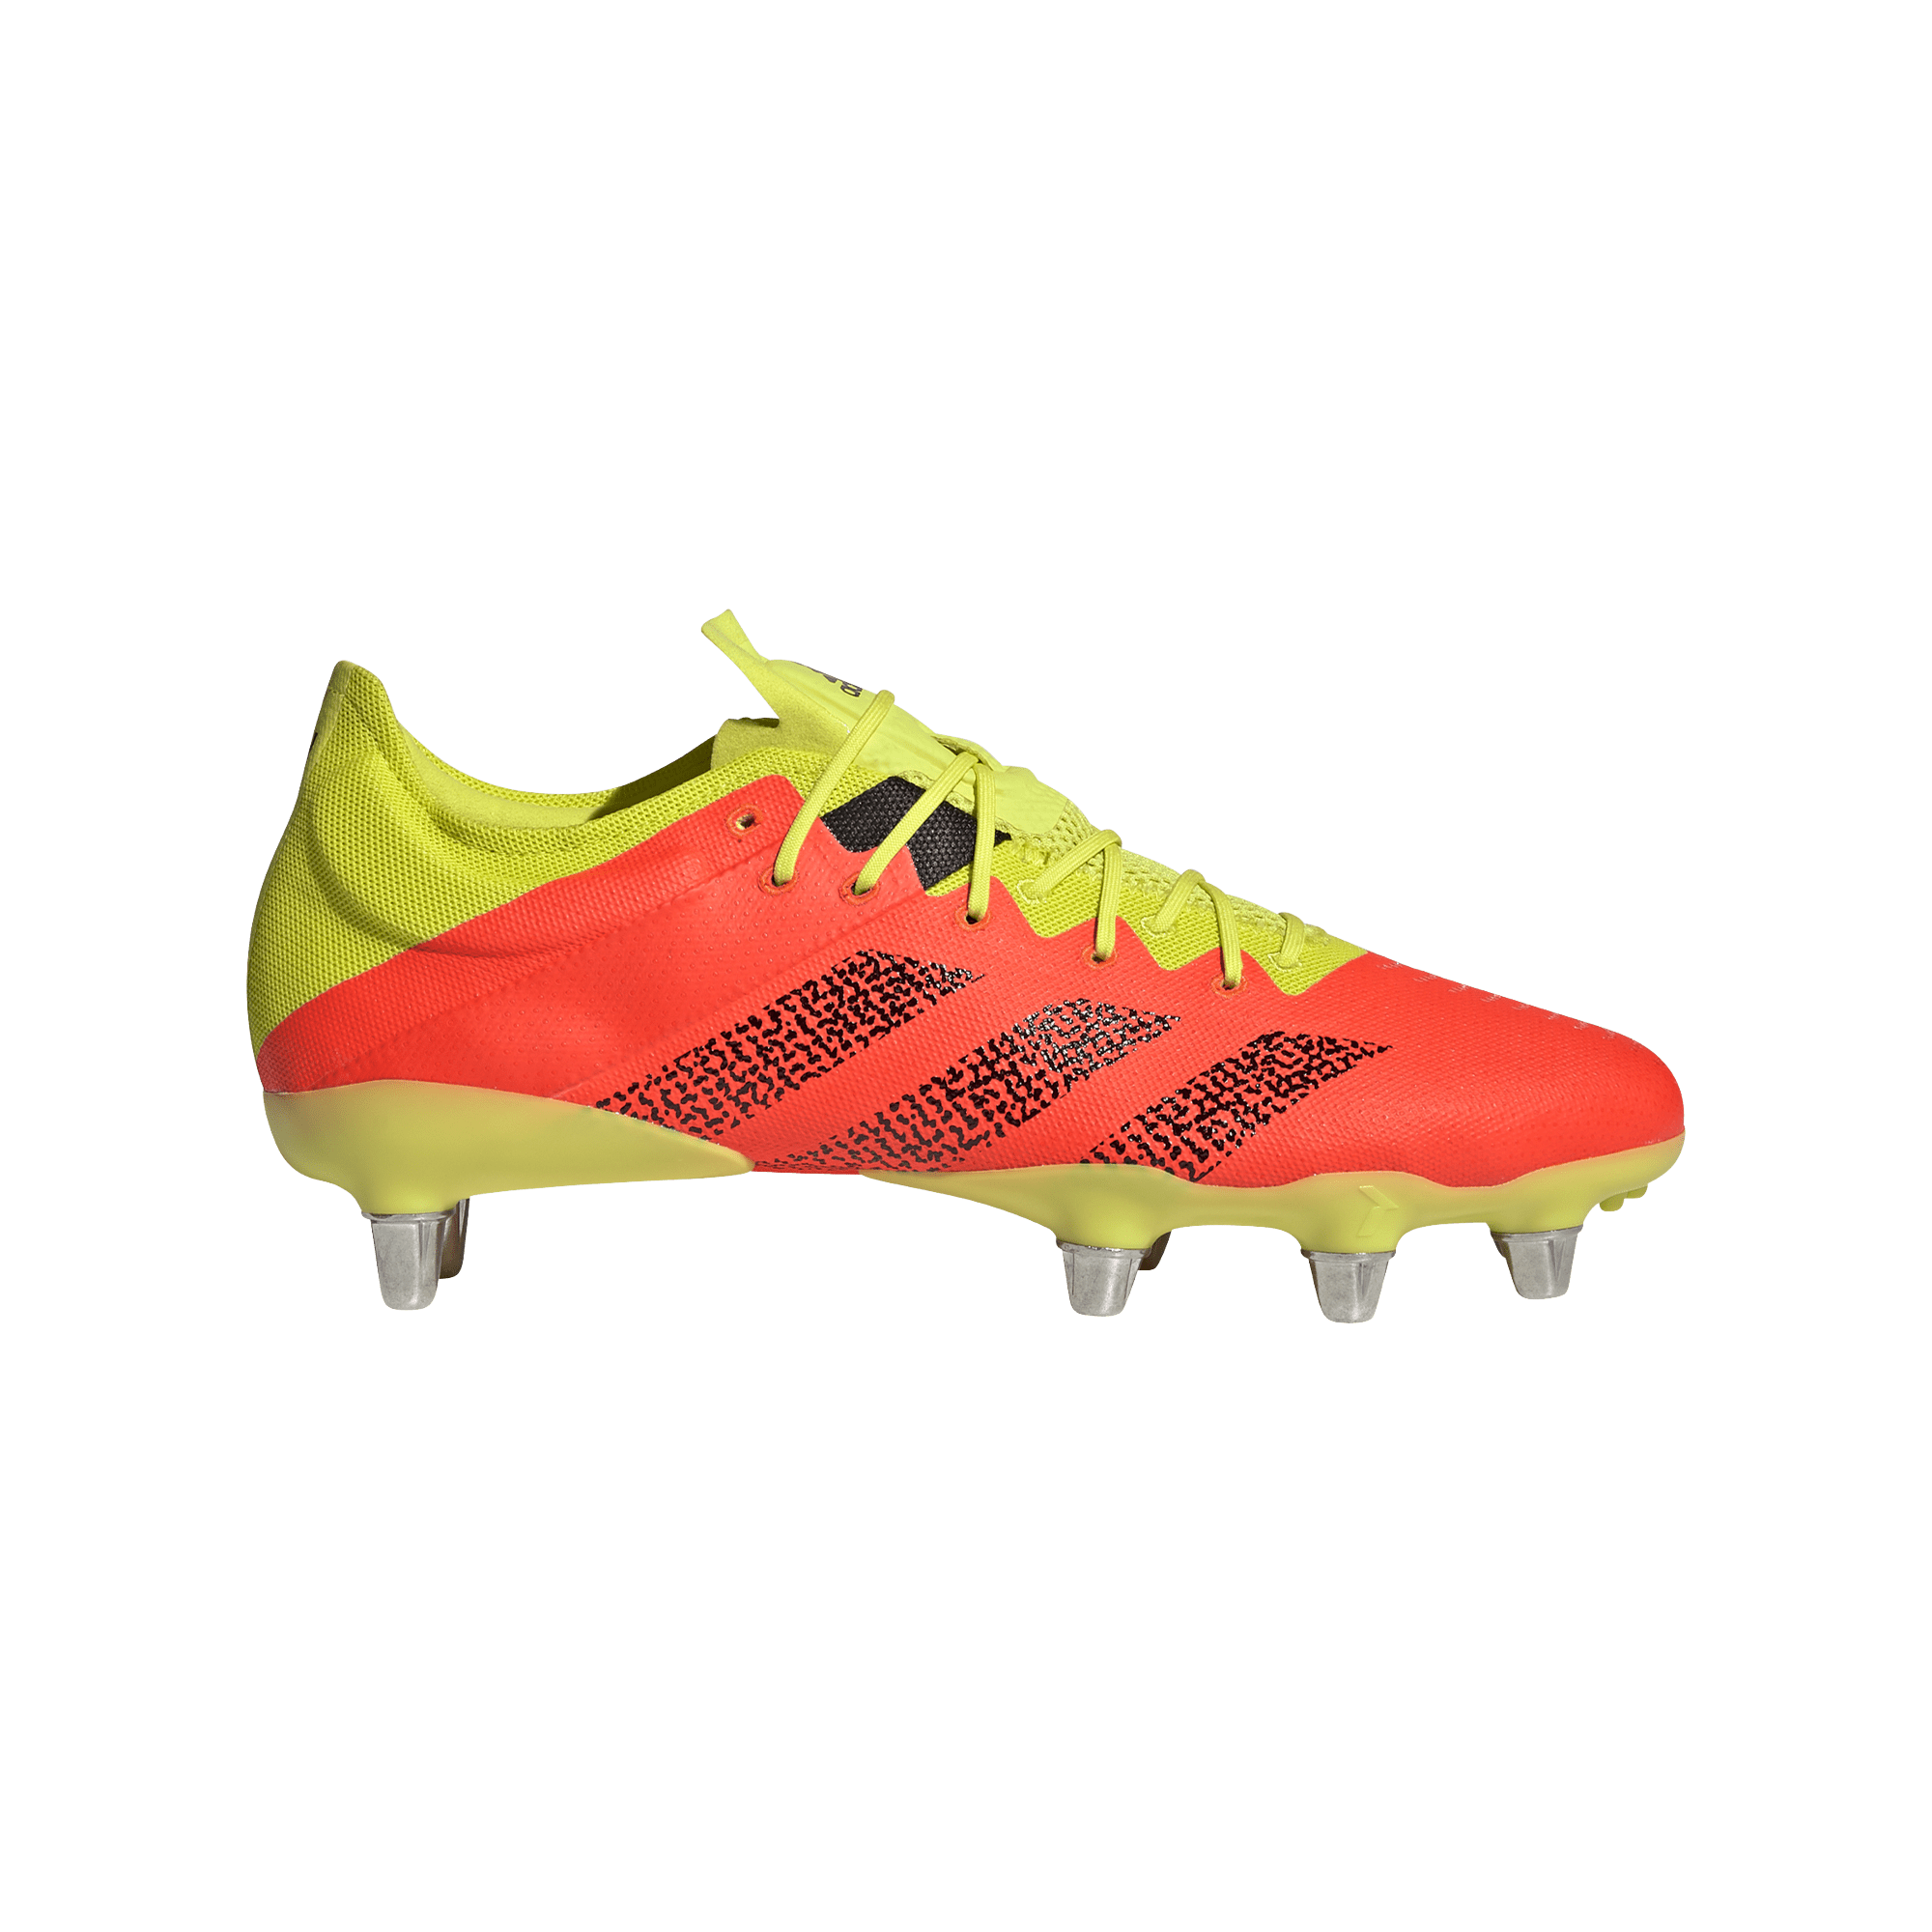 Adidas Kakari Z.0 Rugby Cleat - Soft Ground Boot - Solar Red - SKU 